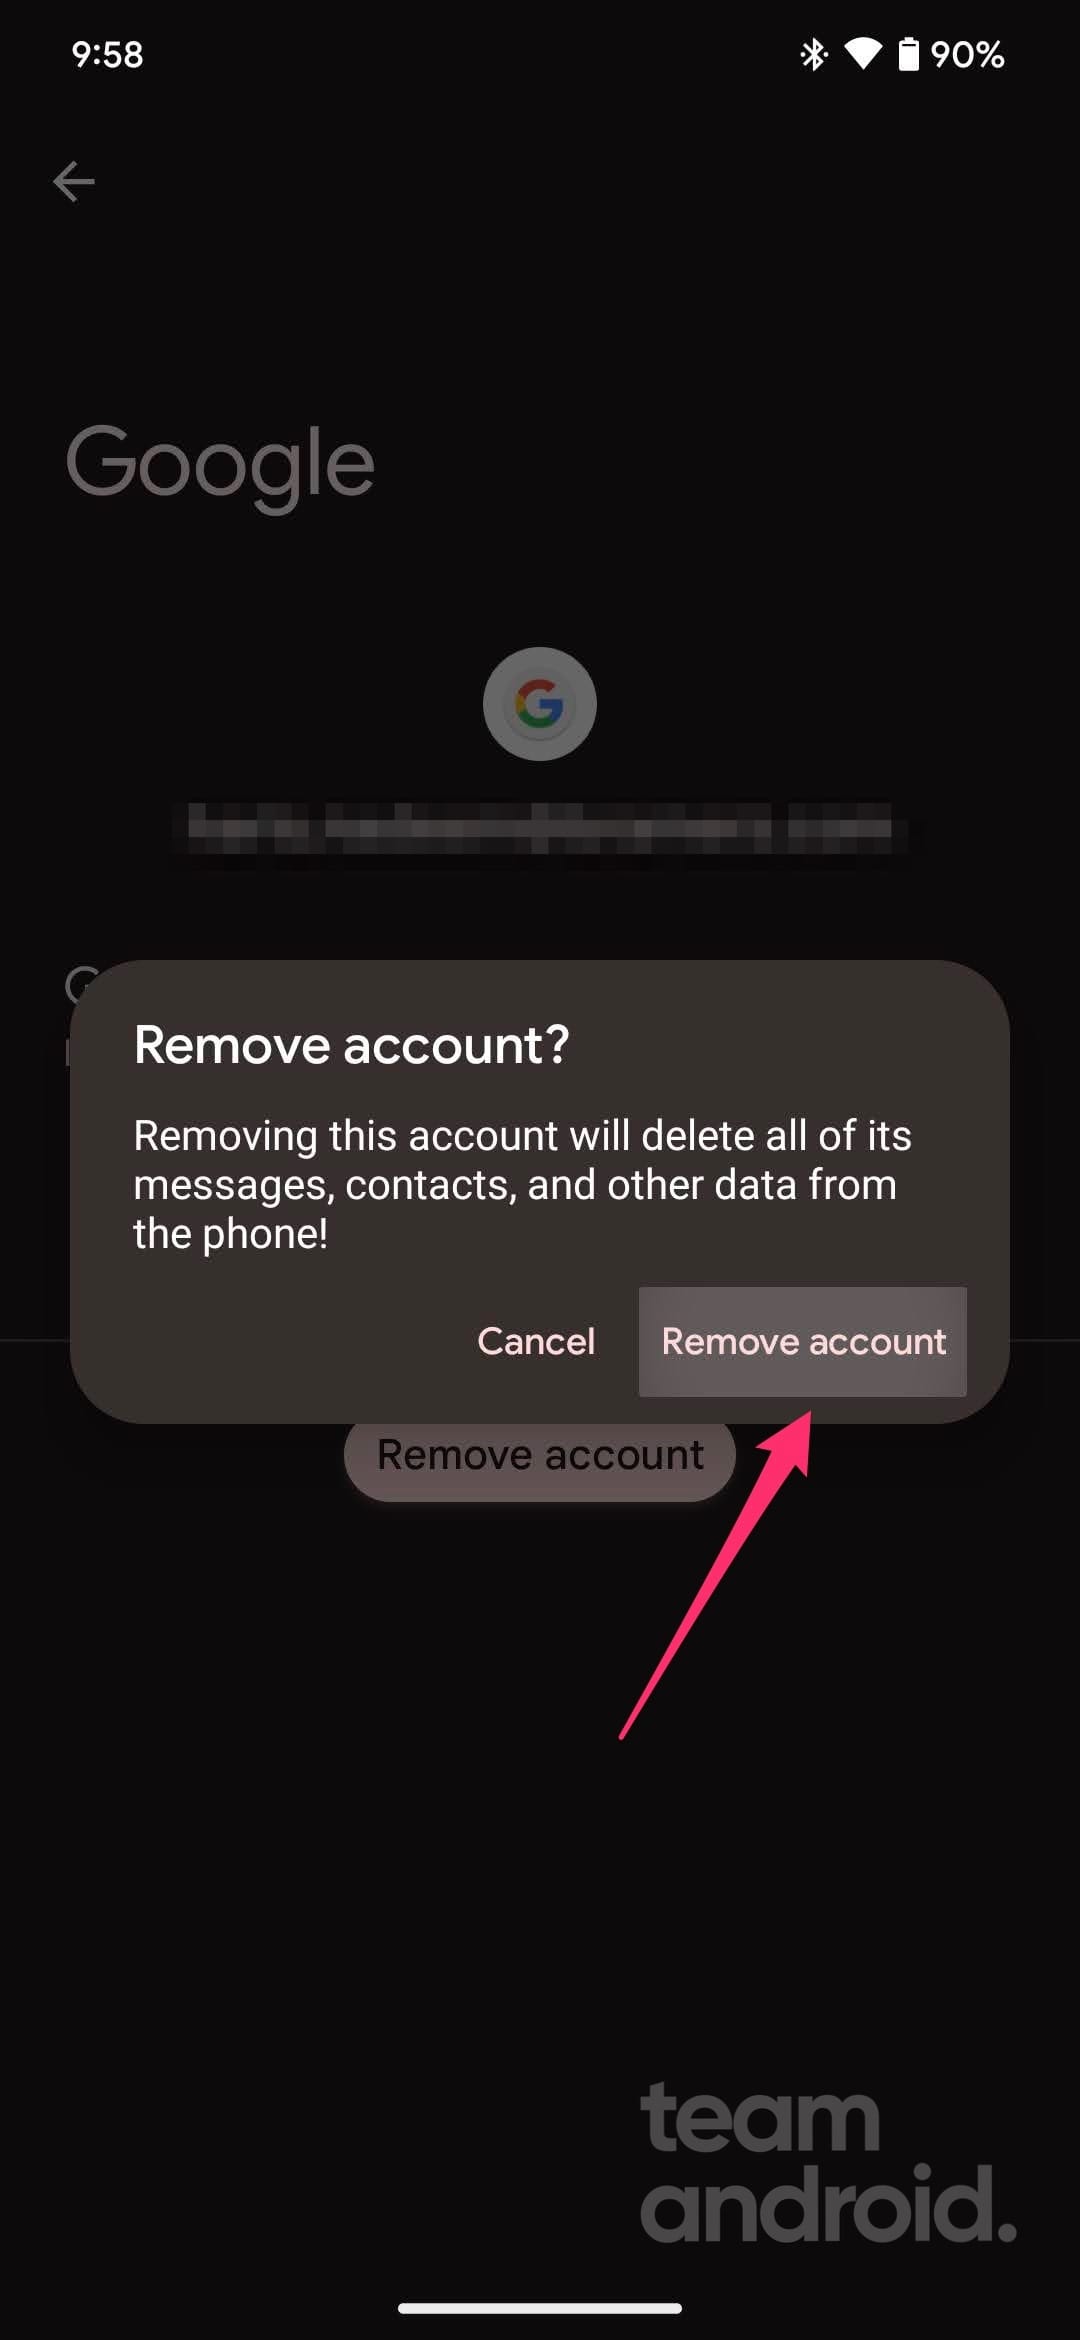 How to Remove Google Account from Android